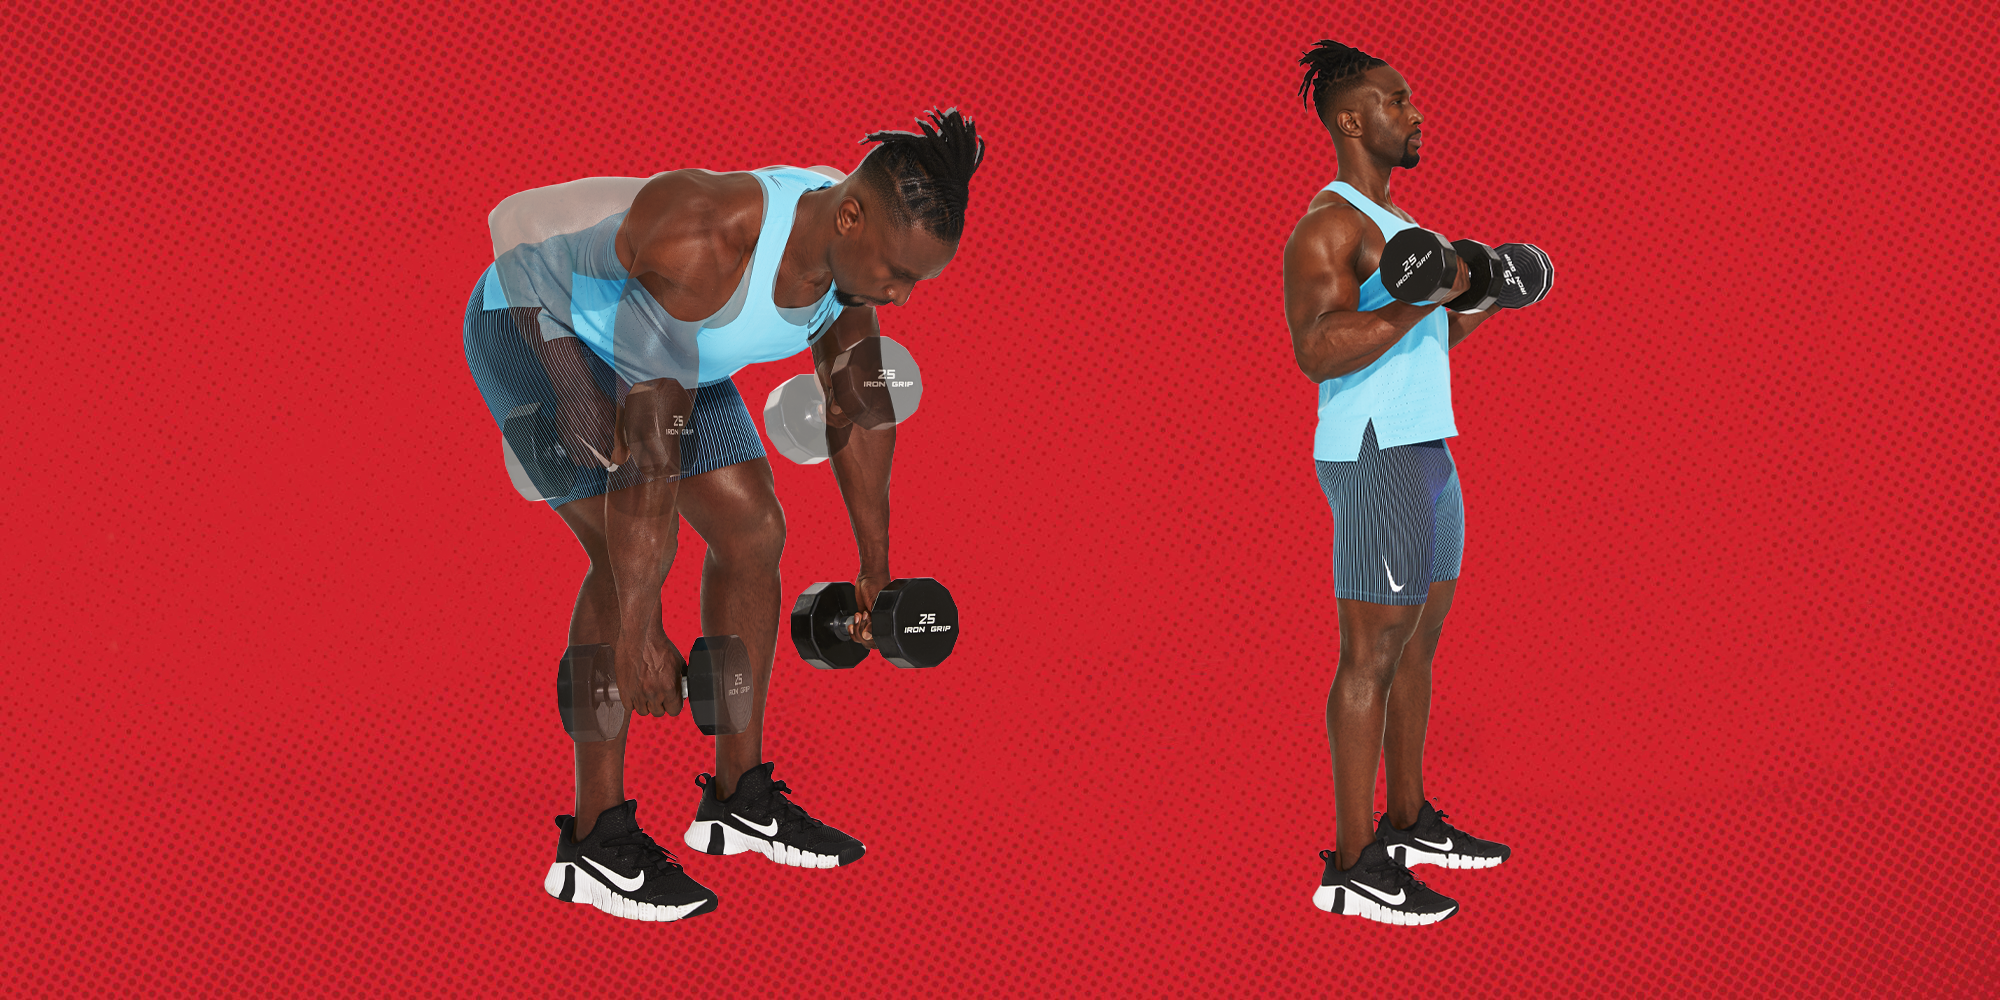 Try This Four-Move Complex Workout Routine For A Quick Sweat